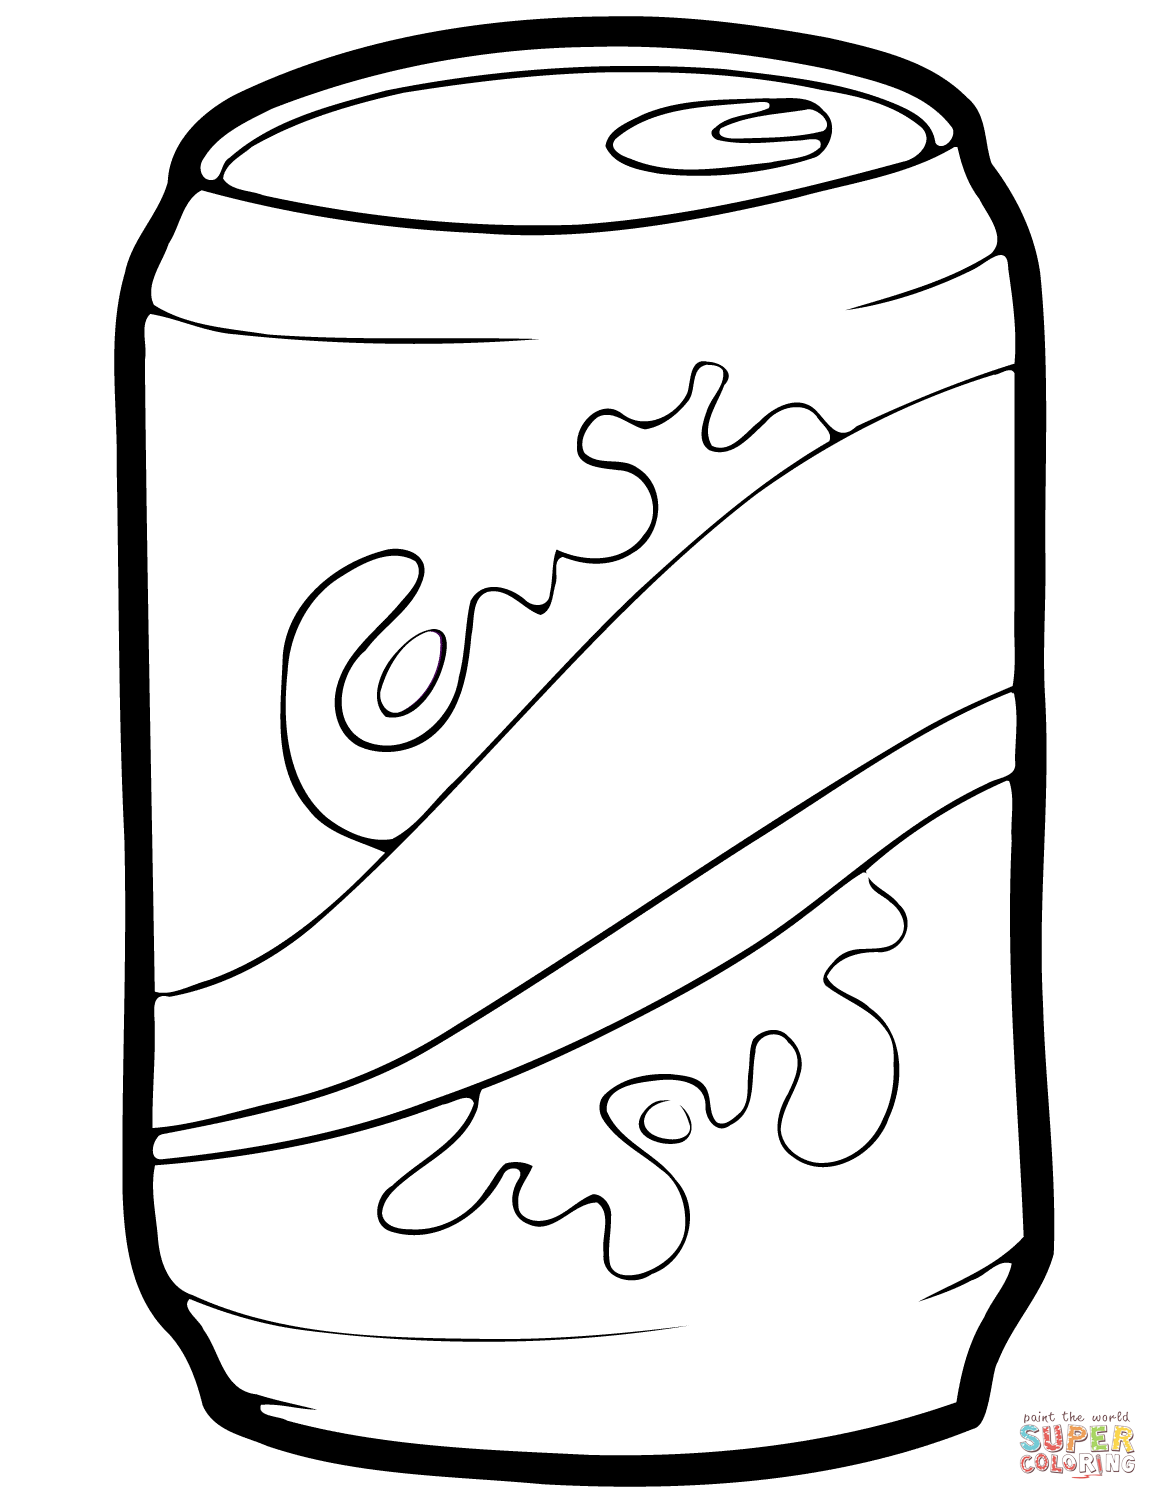 Cola can coloring page free printable coloring pages